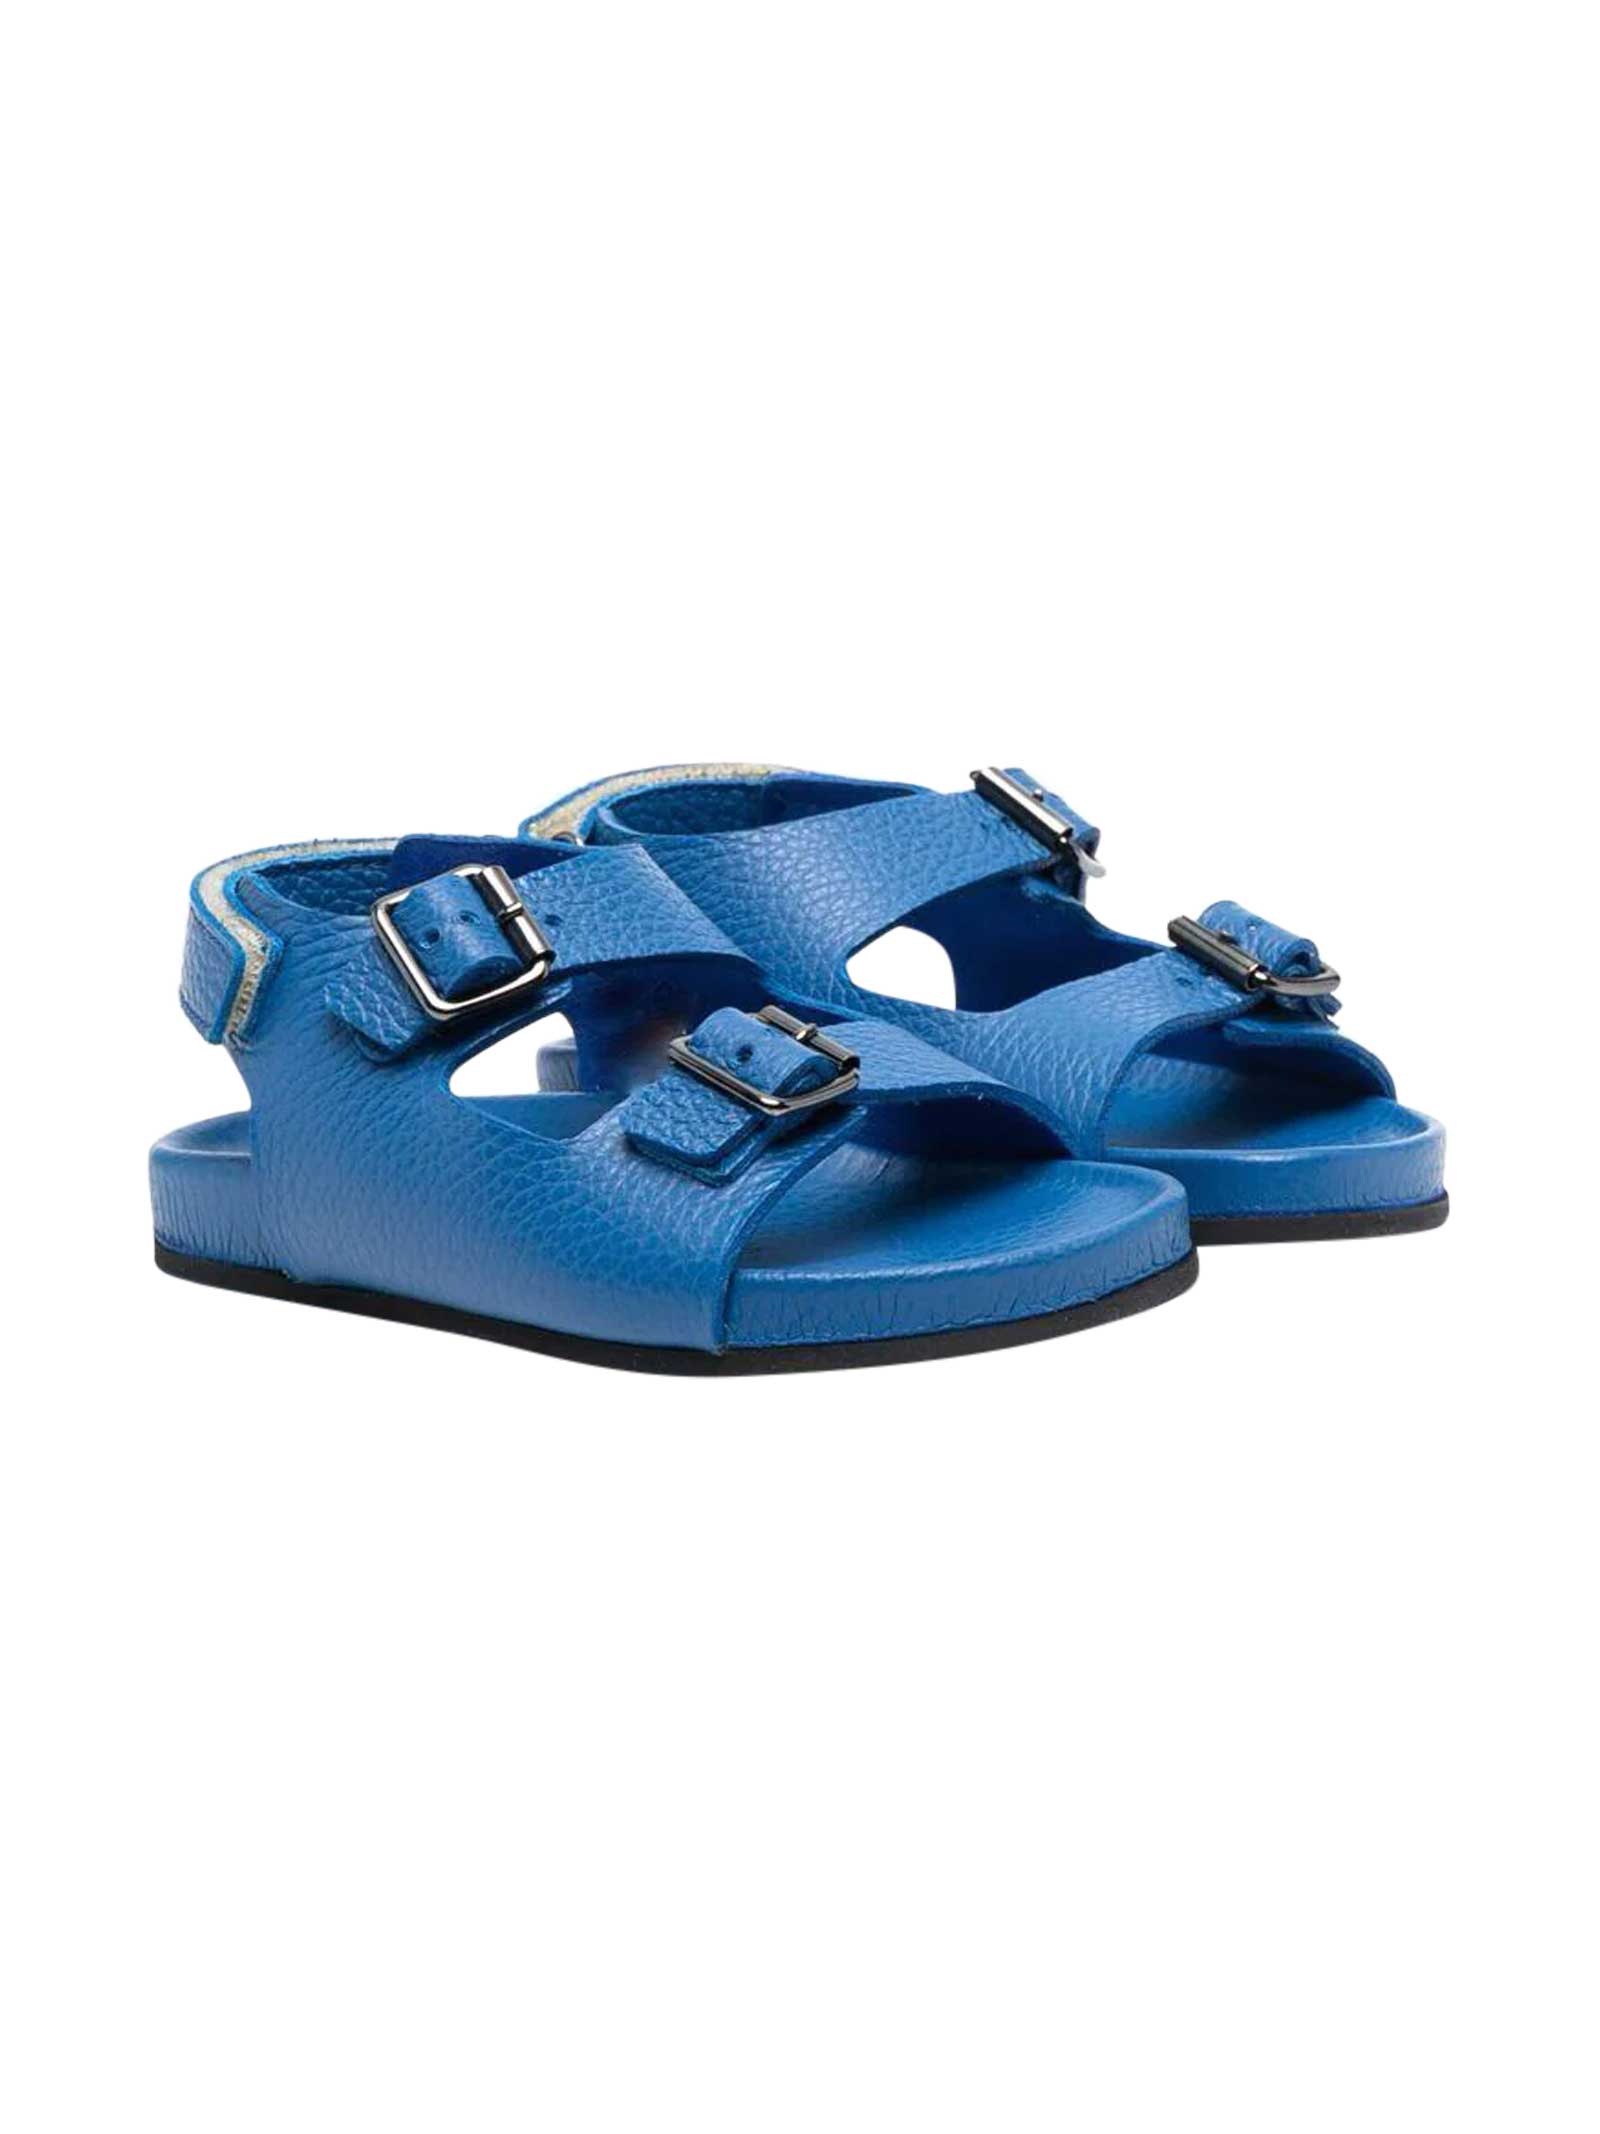 GALLUCCI KIDS BUCKLE SANDALS,T10030AM AND223